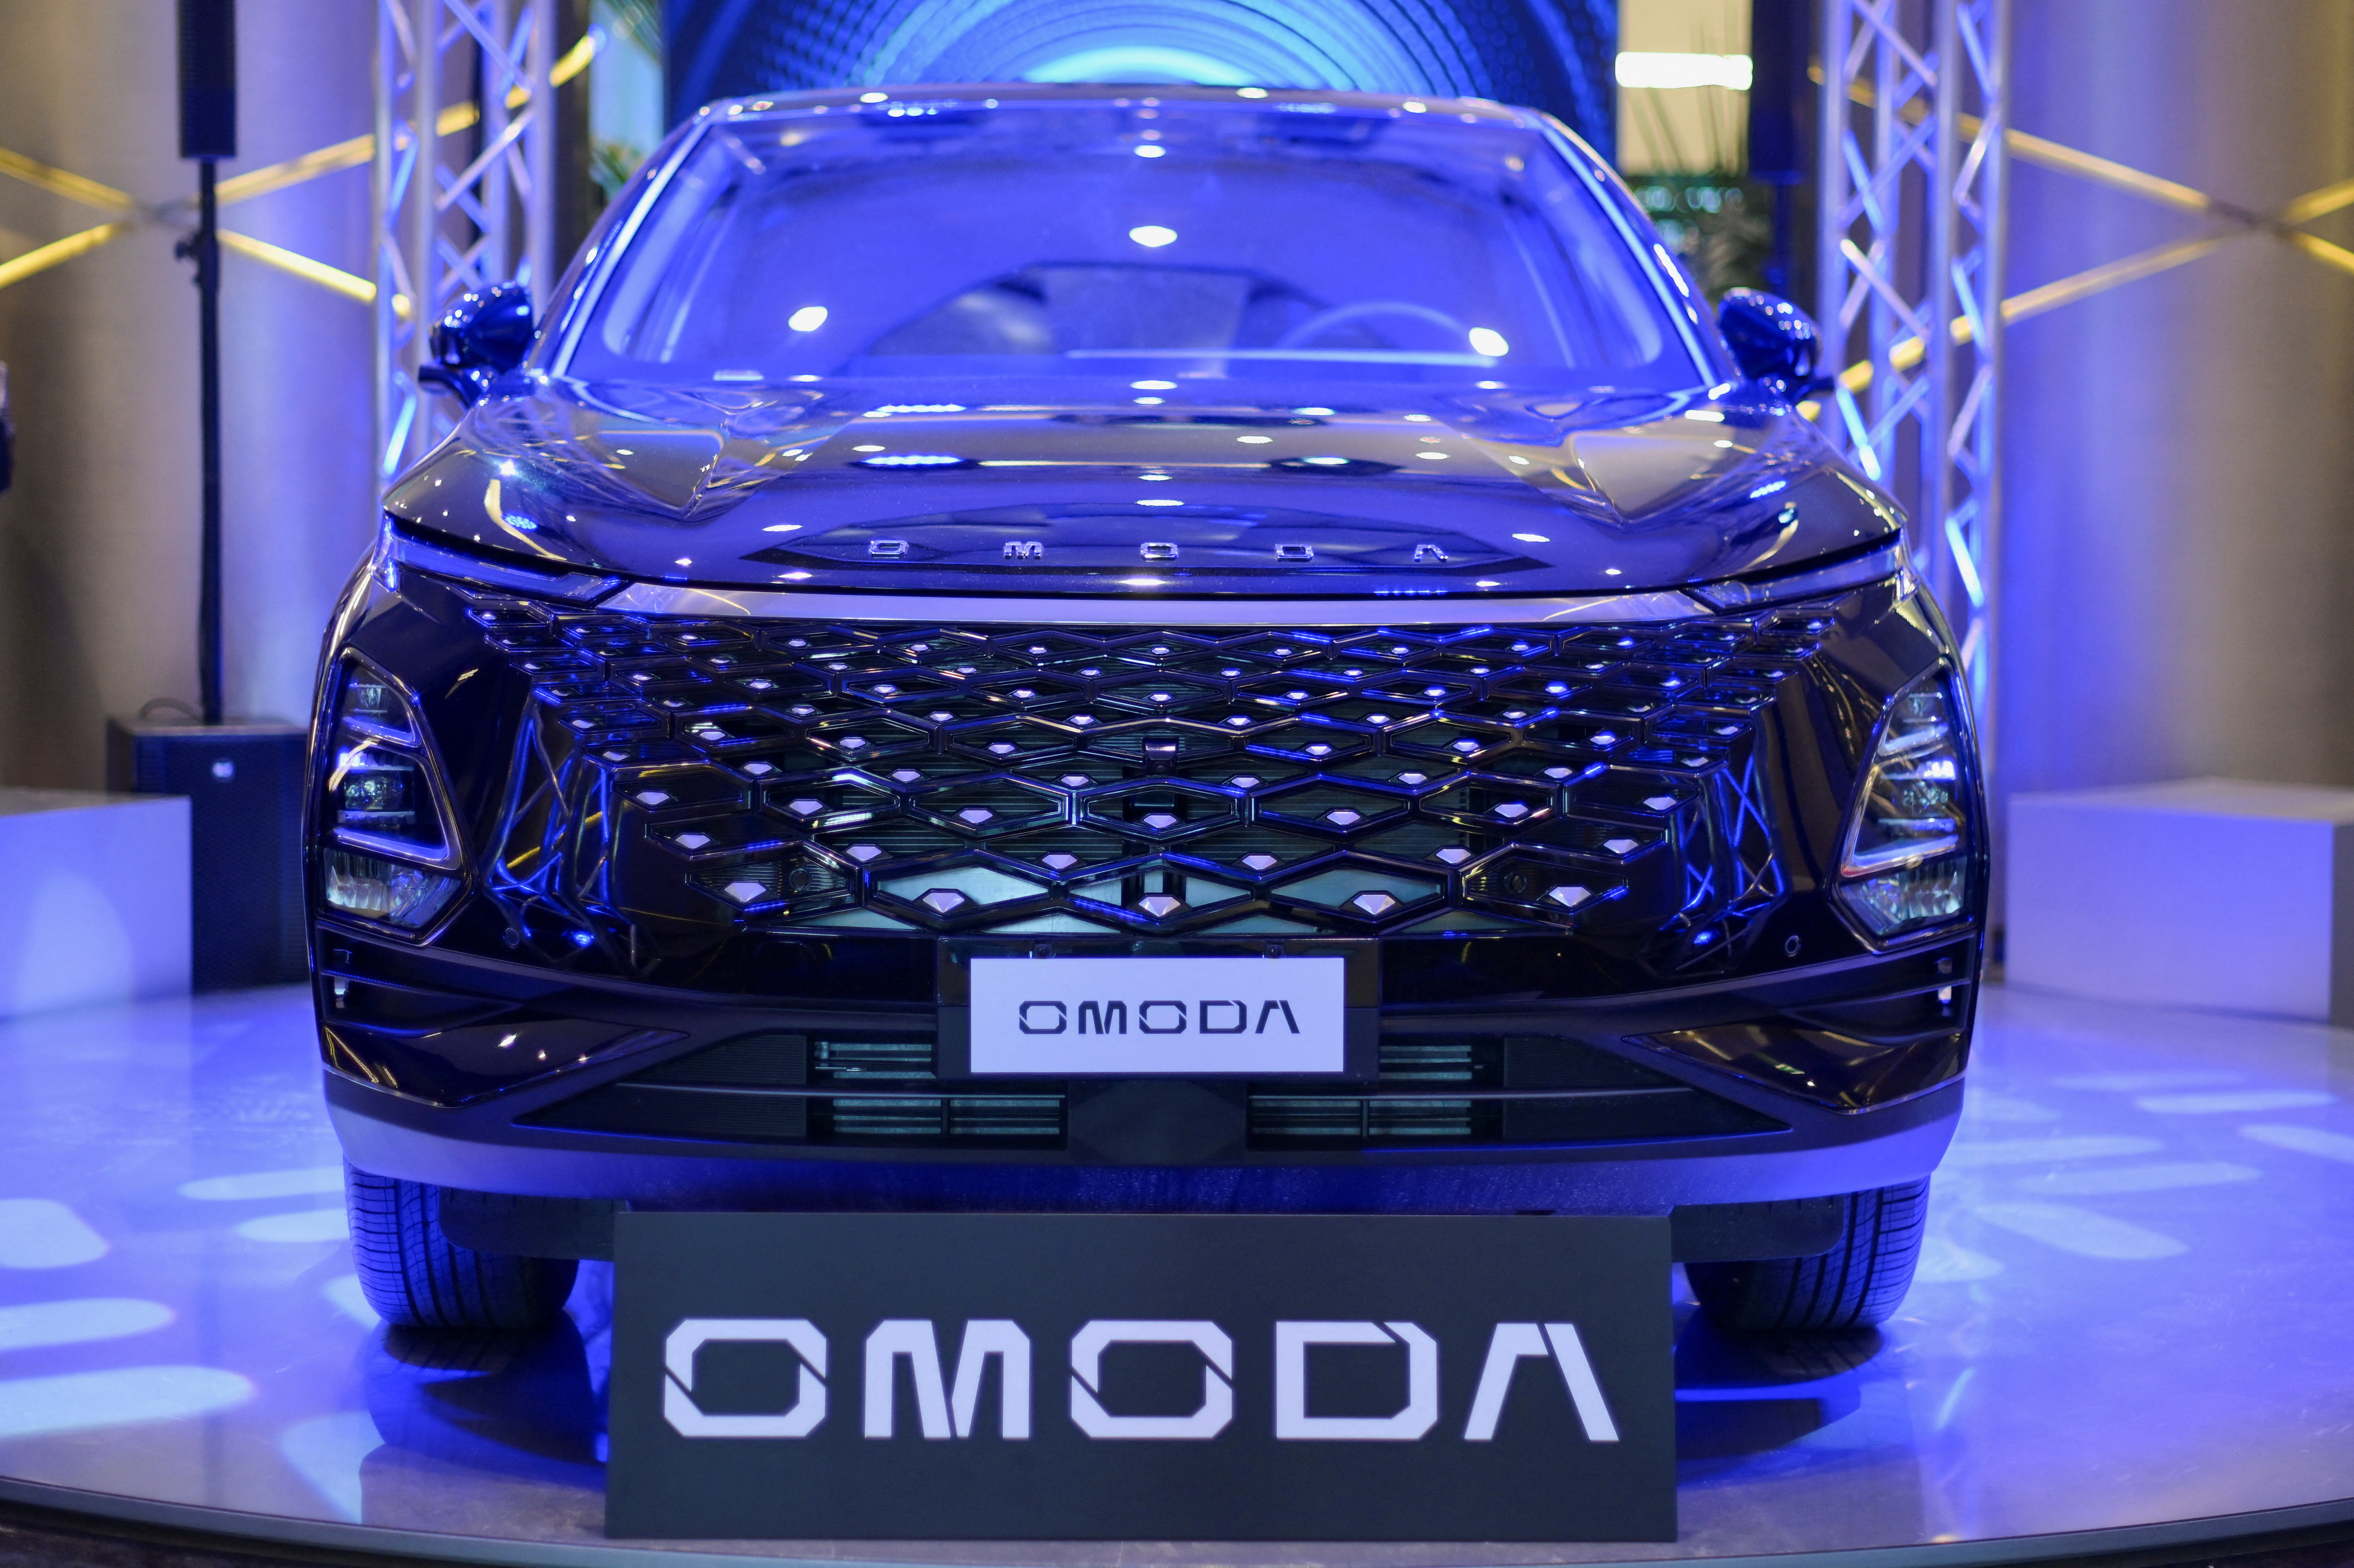 Chinese automaker Chery holds an event to launch its Omoda and Jaecoo cars on the Italian market